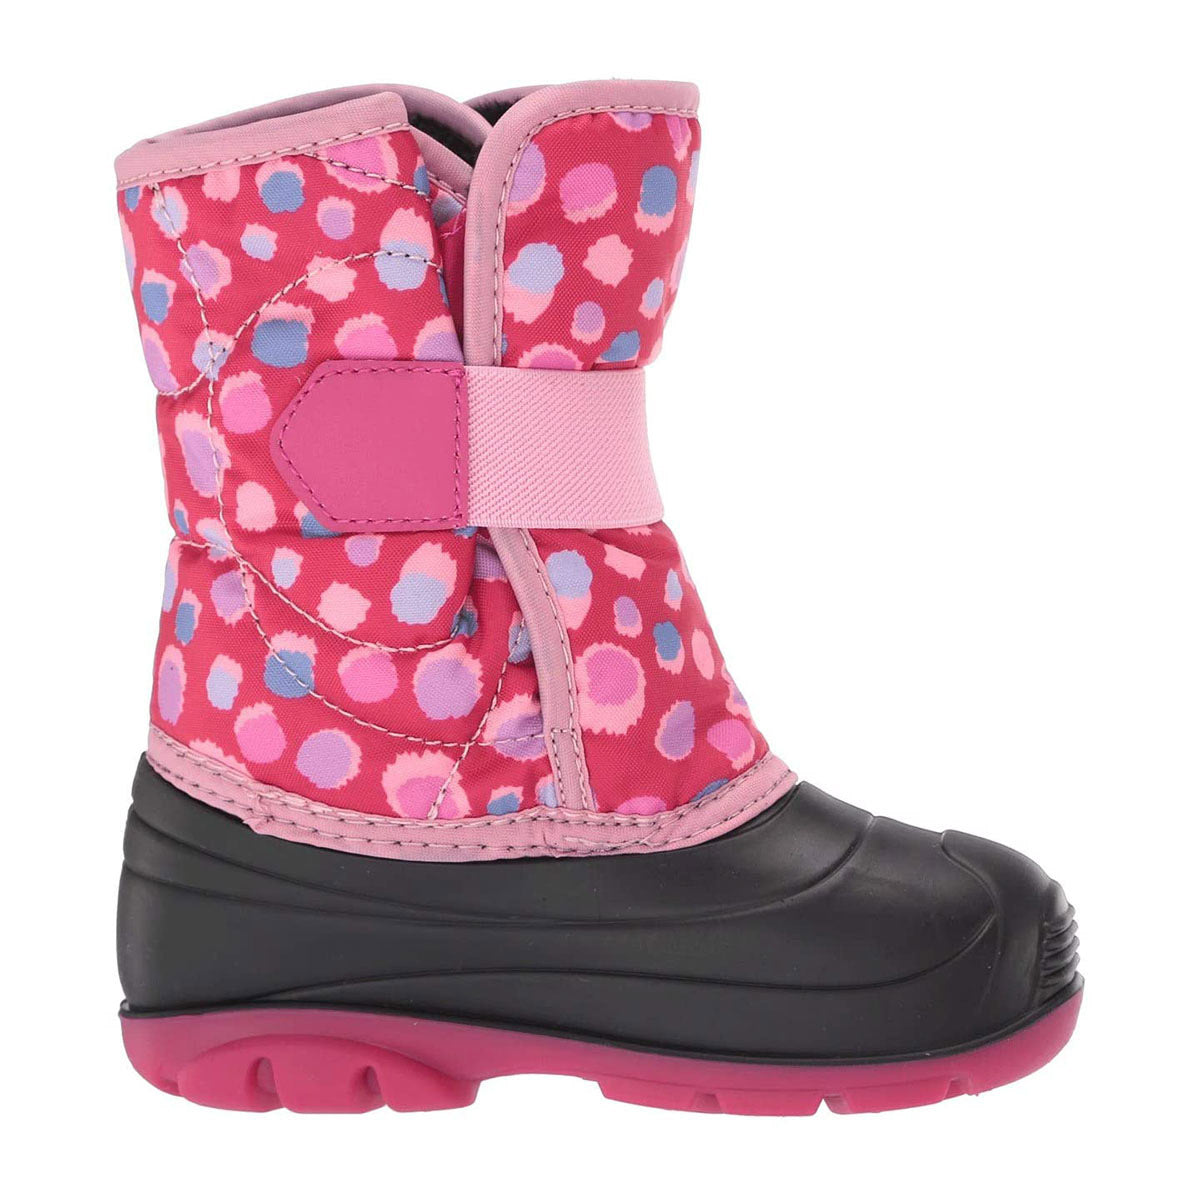 Child's pink and blue polka-dotted Kamik Snowbug 4 Bright Rose toddler snow boots with black waterproof lower and pink sole.